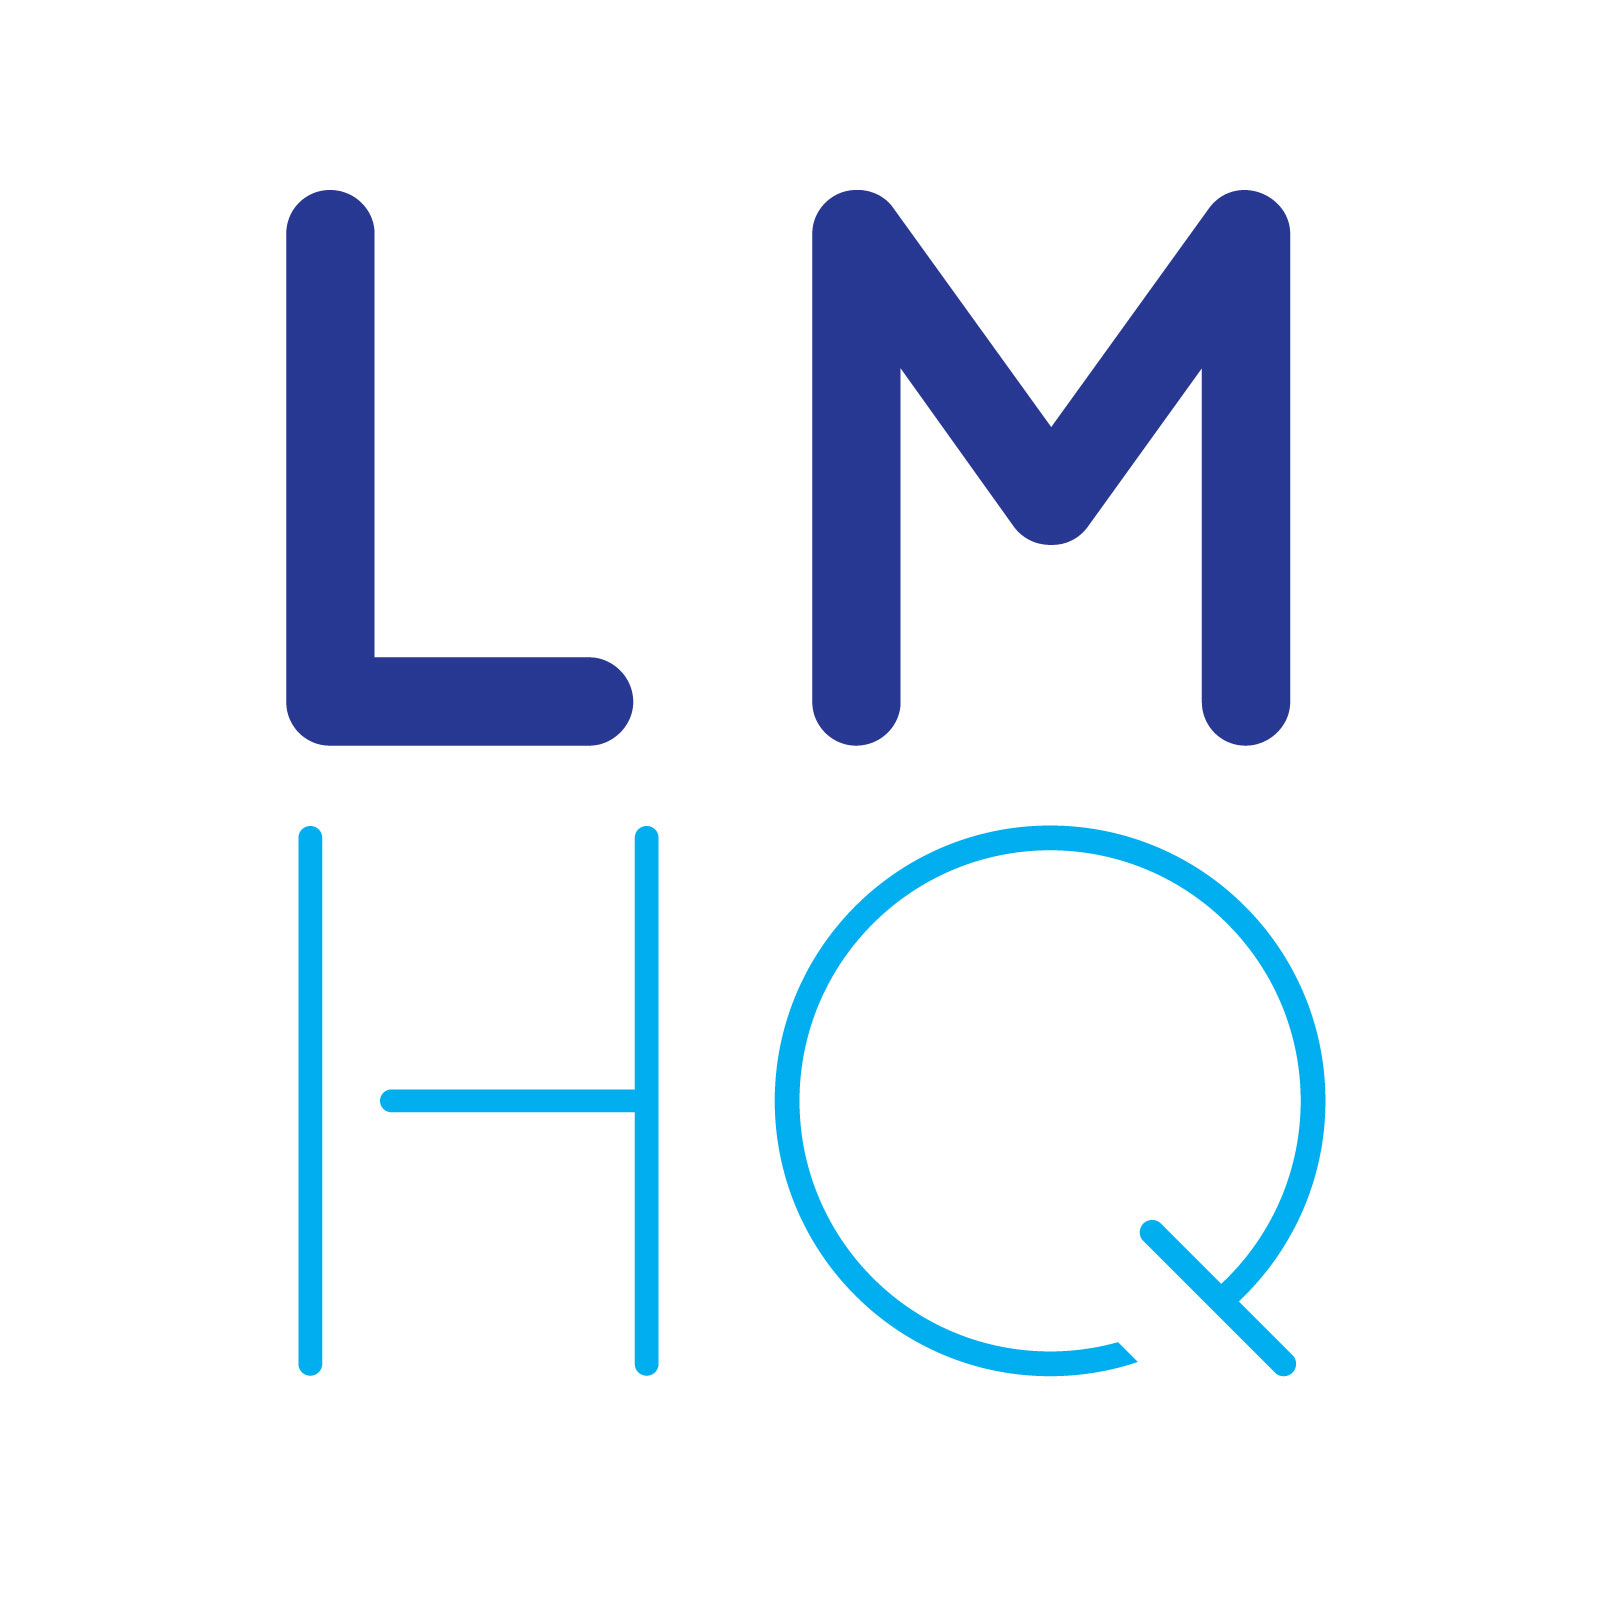 LMHQ, Alliance for Downtown New York